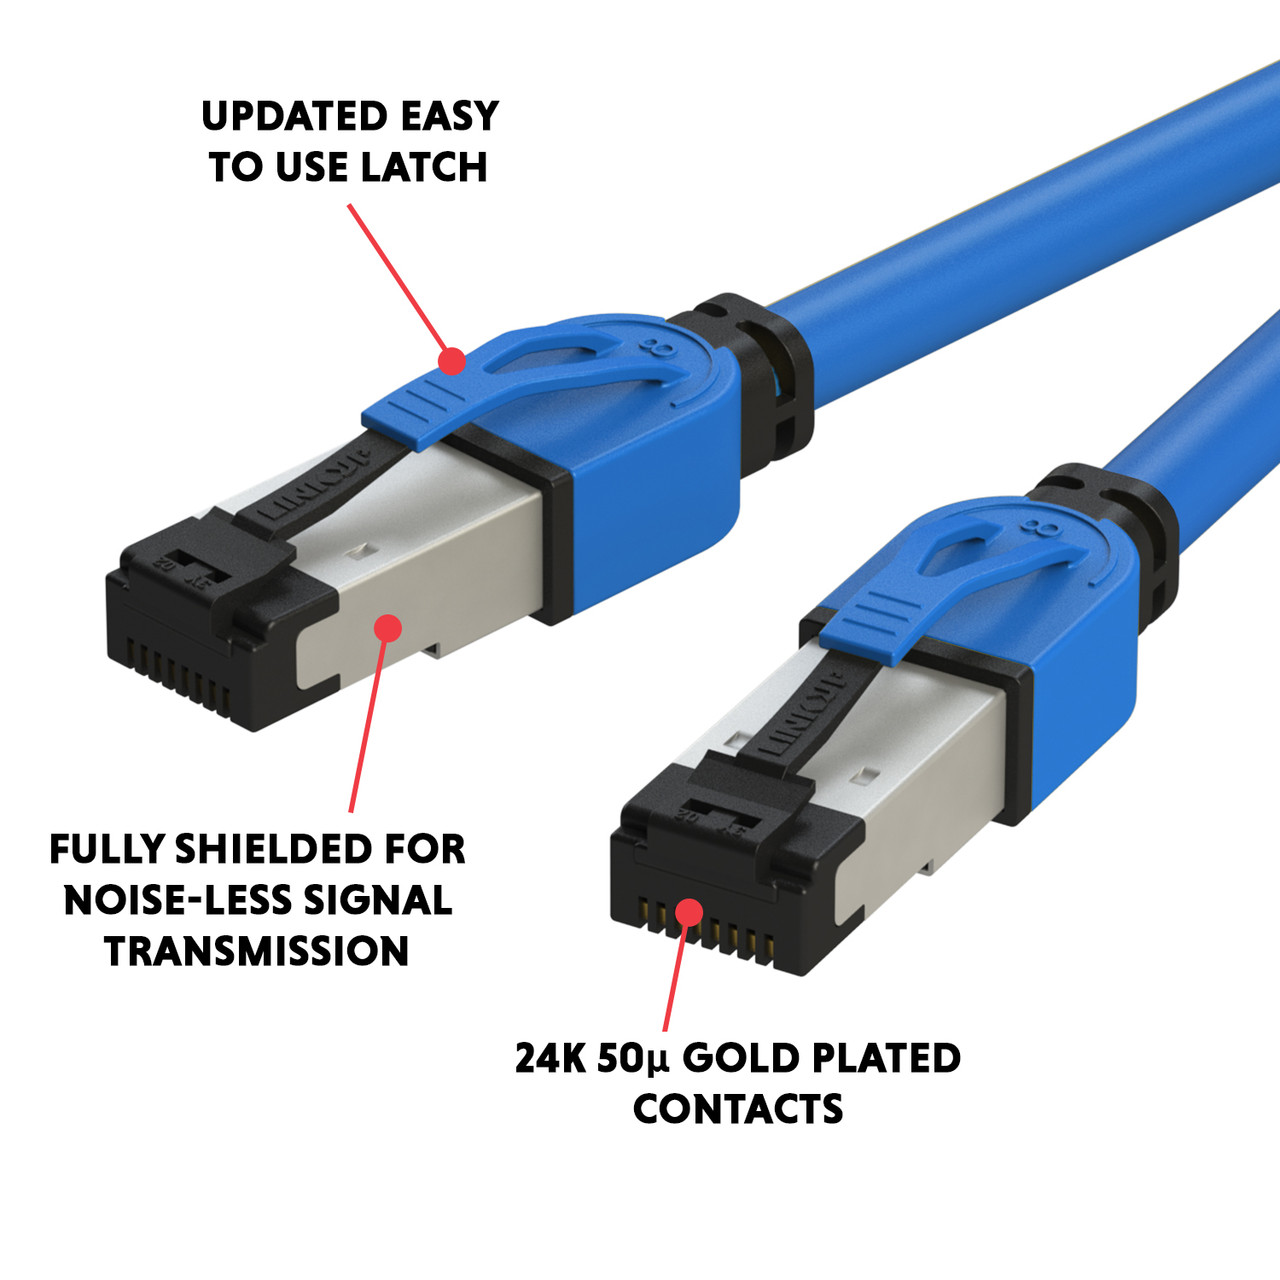 Buhbo CAT 8 Ethernet Cable SSTP Shielded Network Cable Category 8 RJ45  26AWG (10 ft) Blue